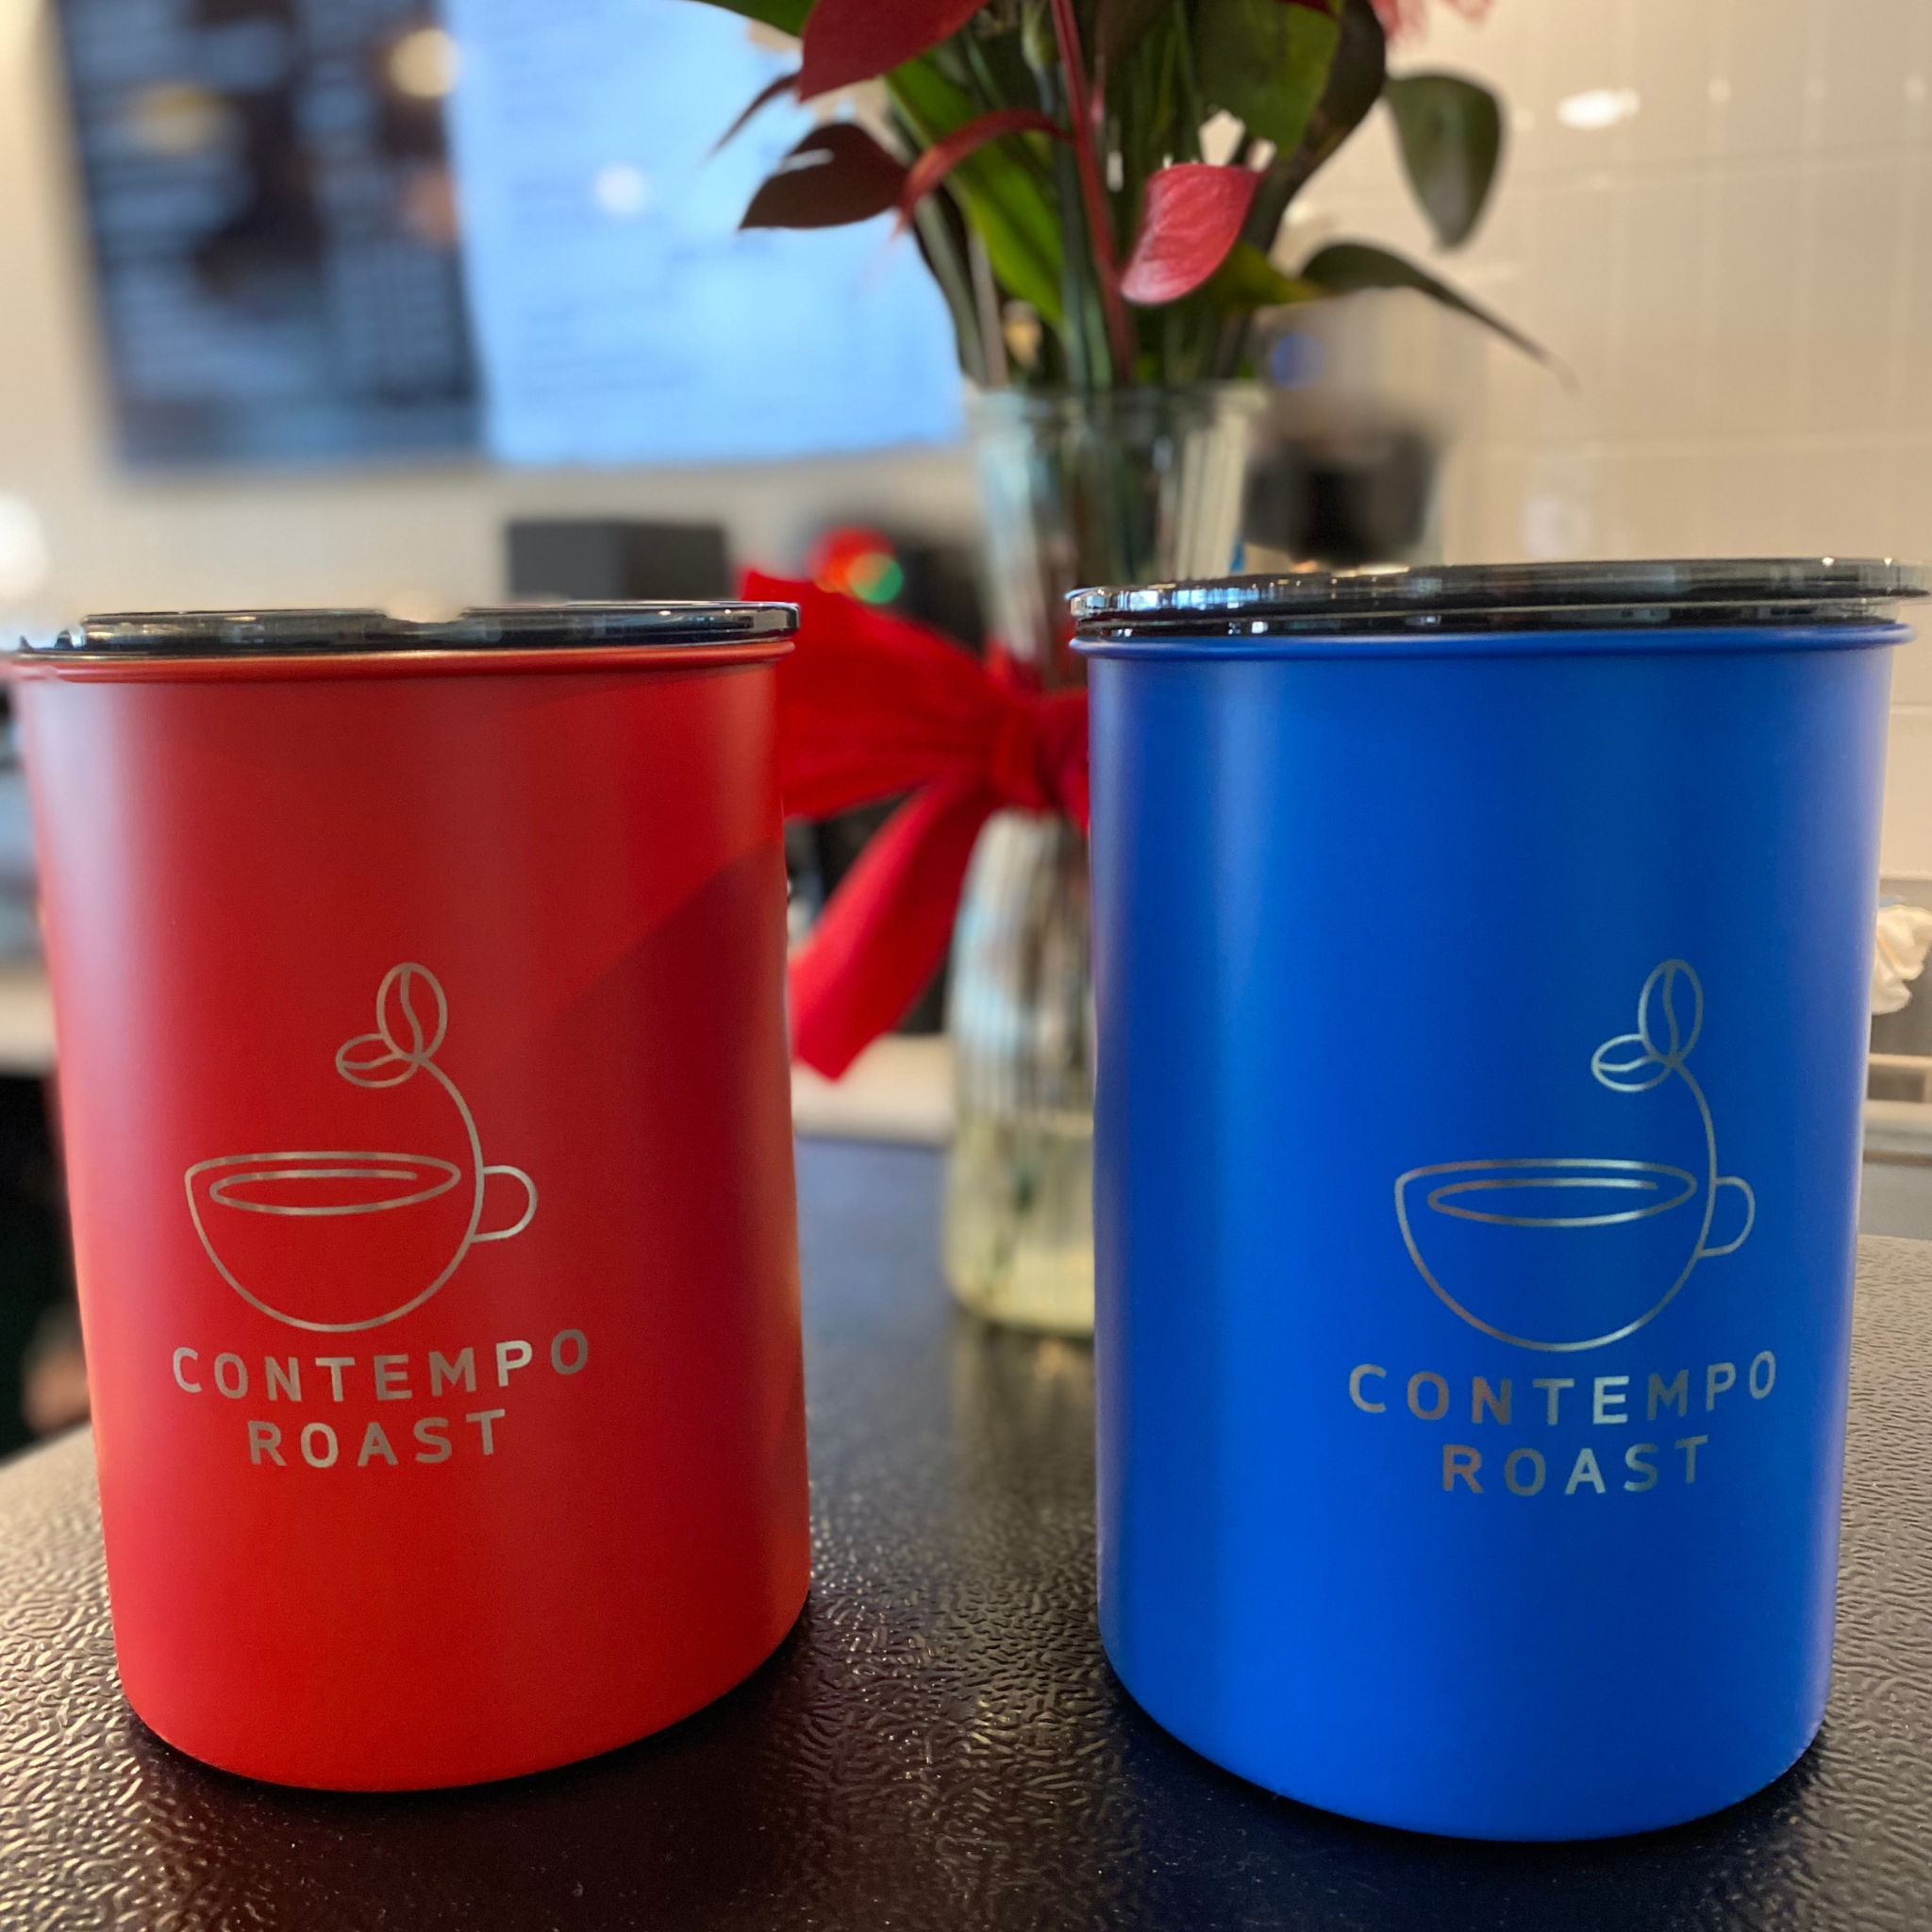 matte red and matte blue canisters with ContempoRoast etched on fronts sitting in a coffee shop